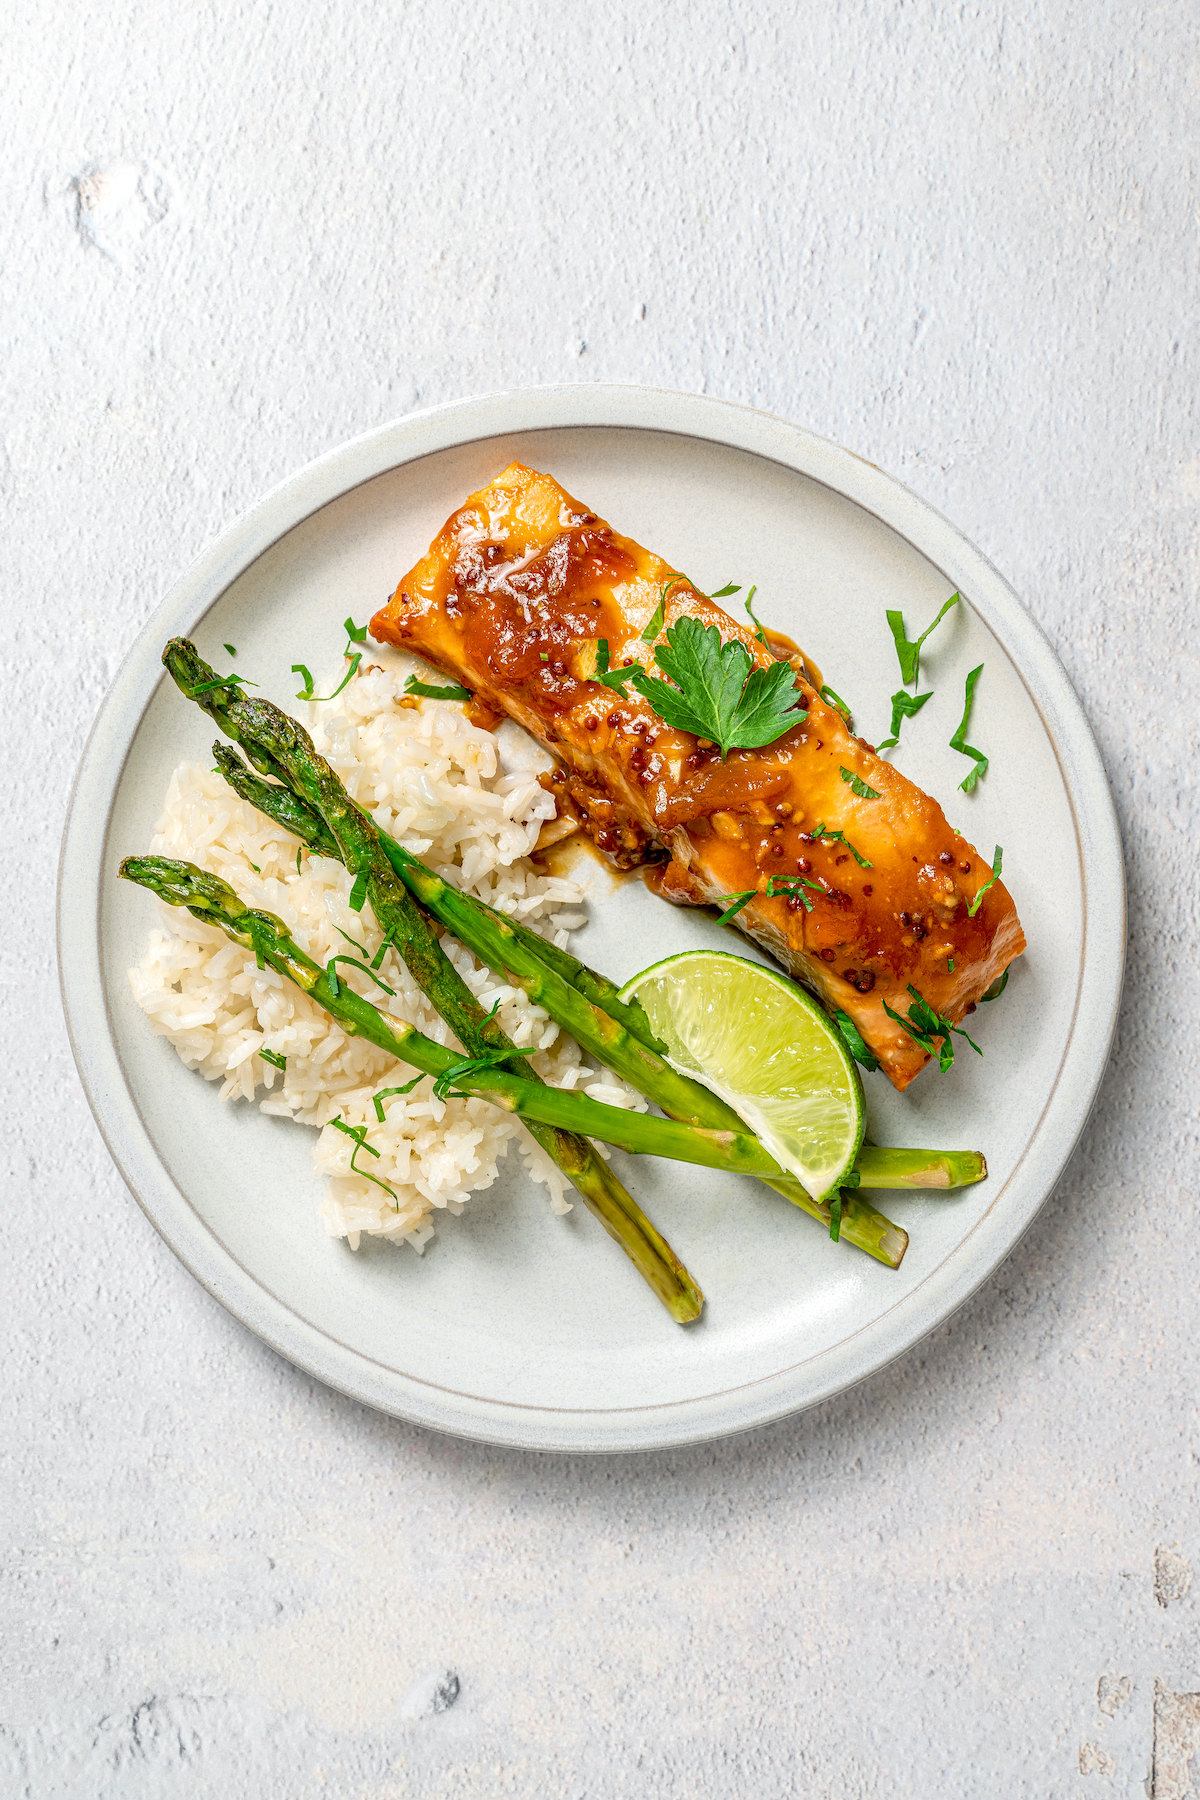 A dinner plate with rice, asparagus, salmon, and a lime wedge.